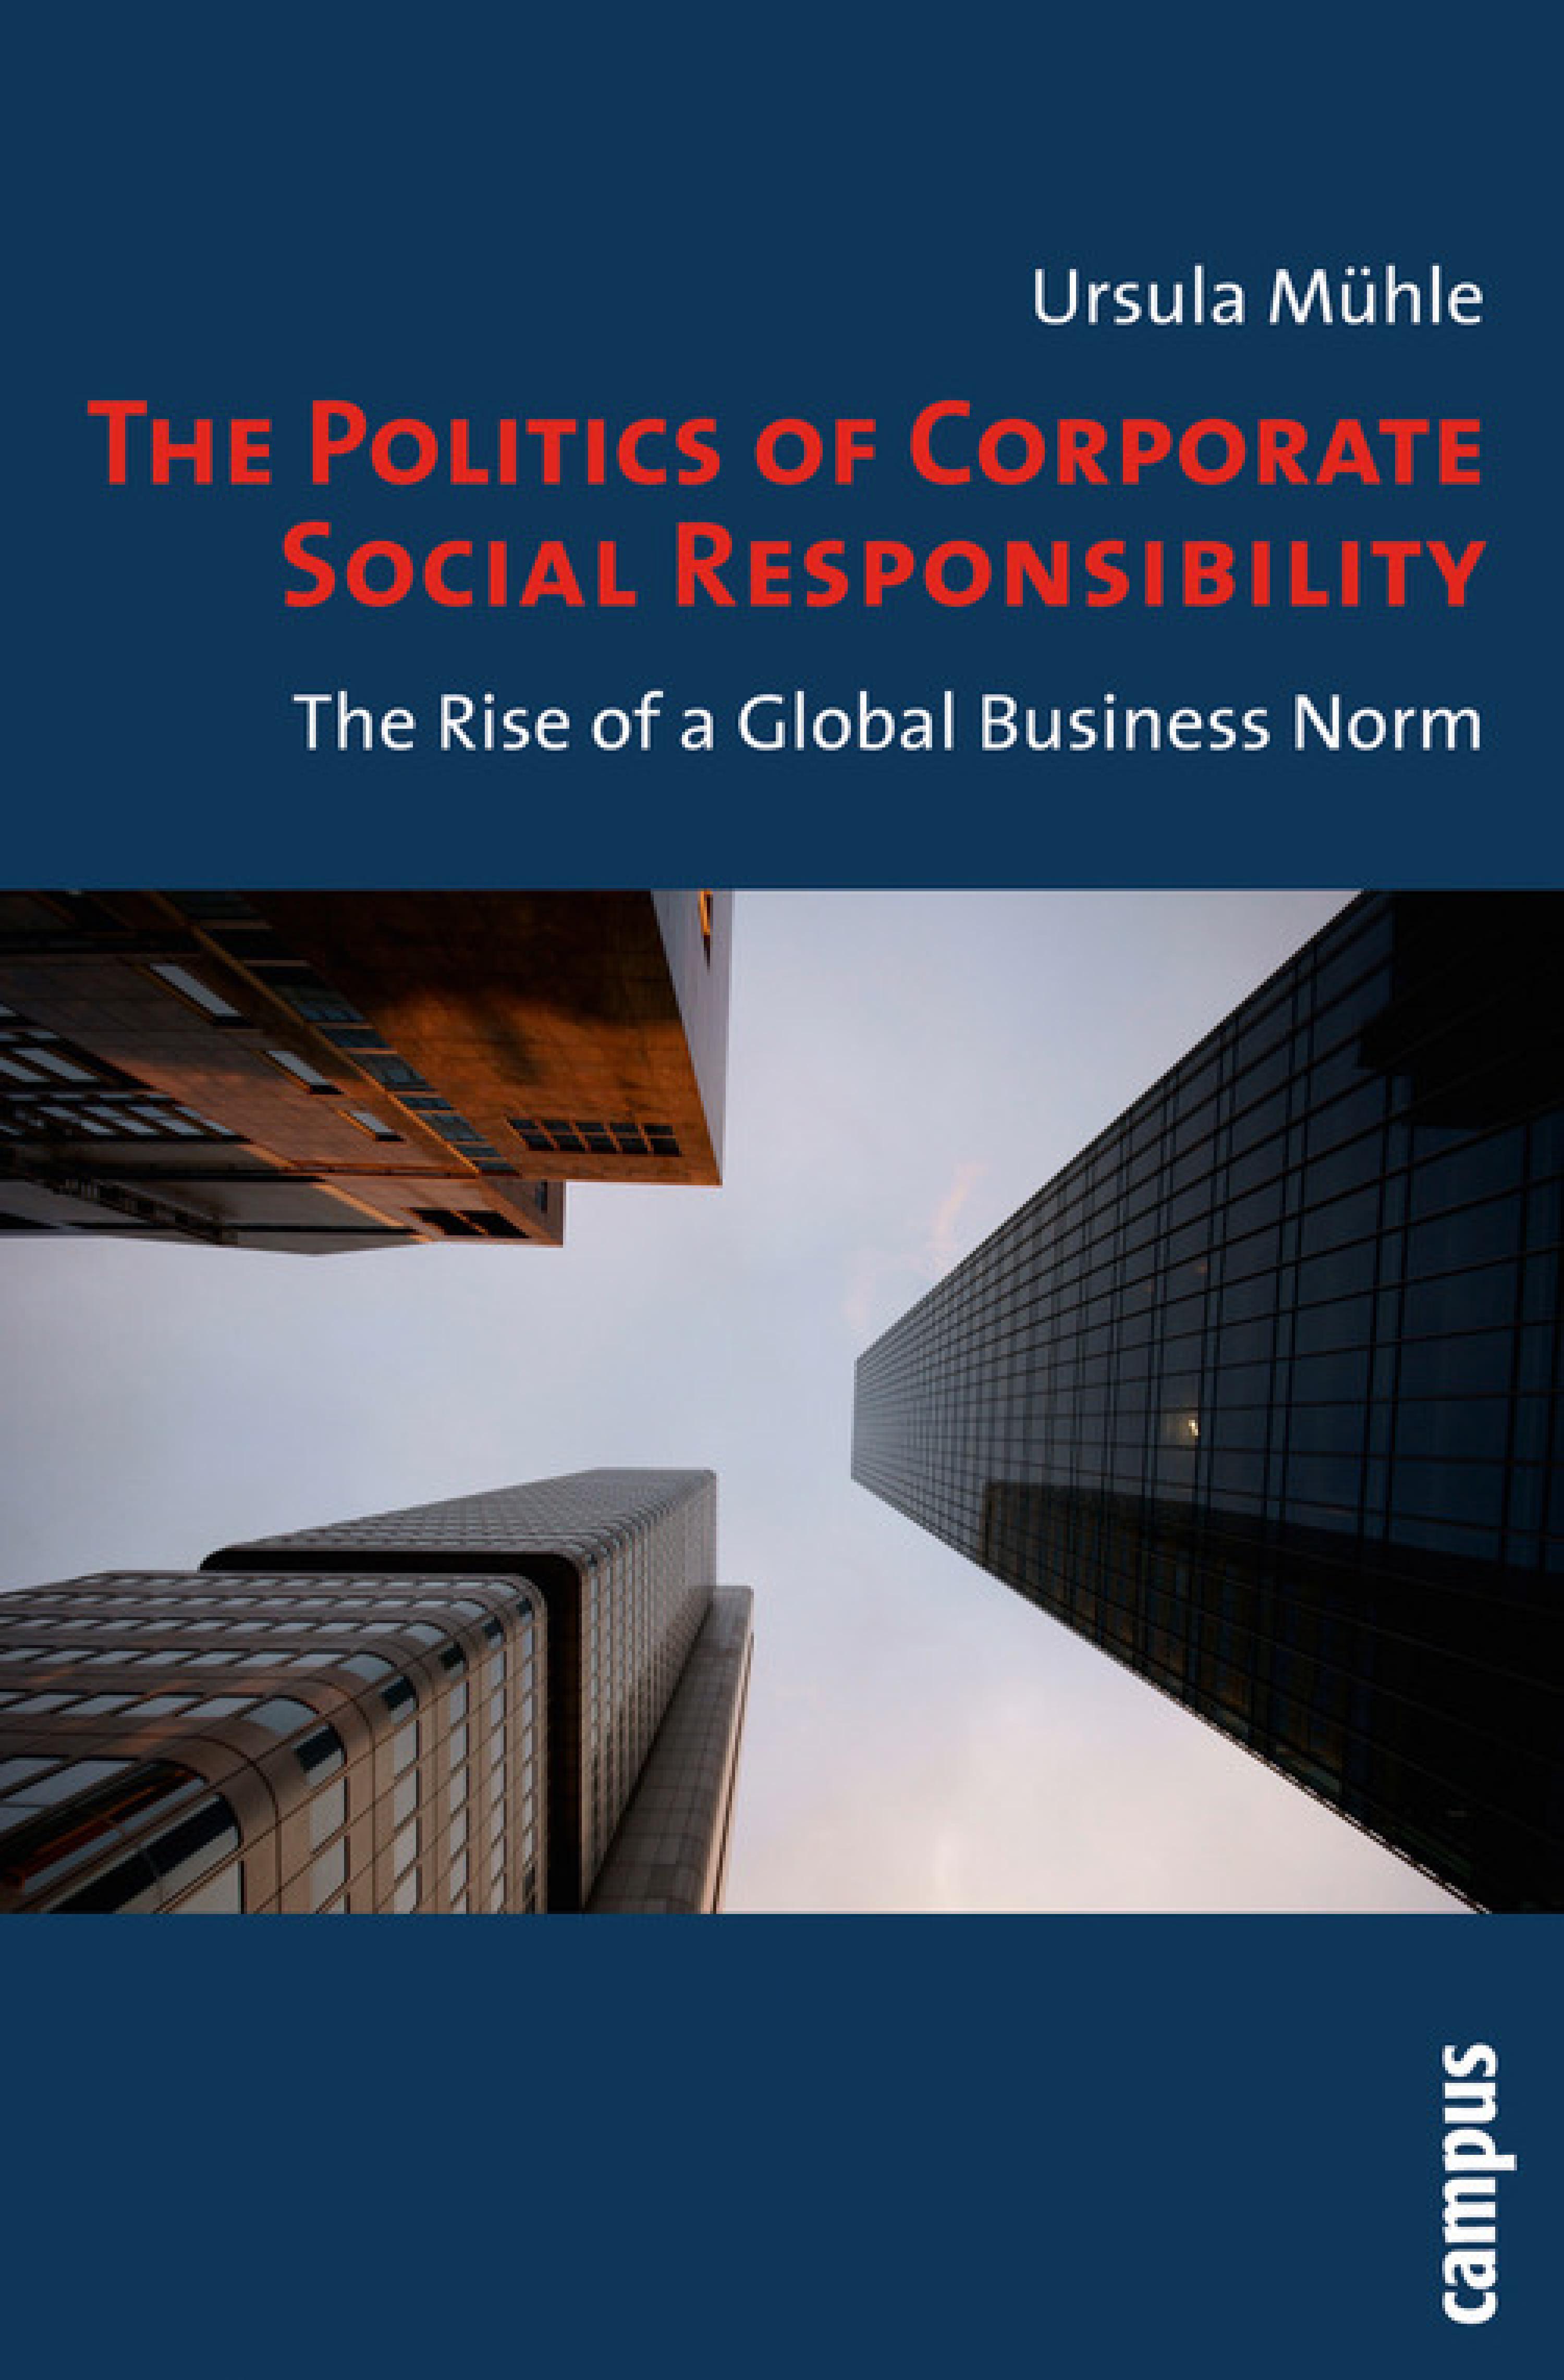 The Politics of Corporate Social Responsibility